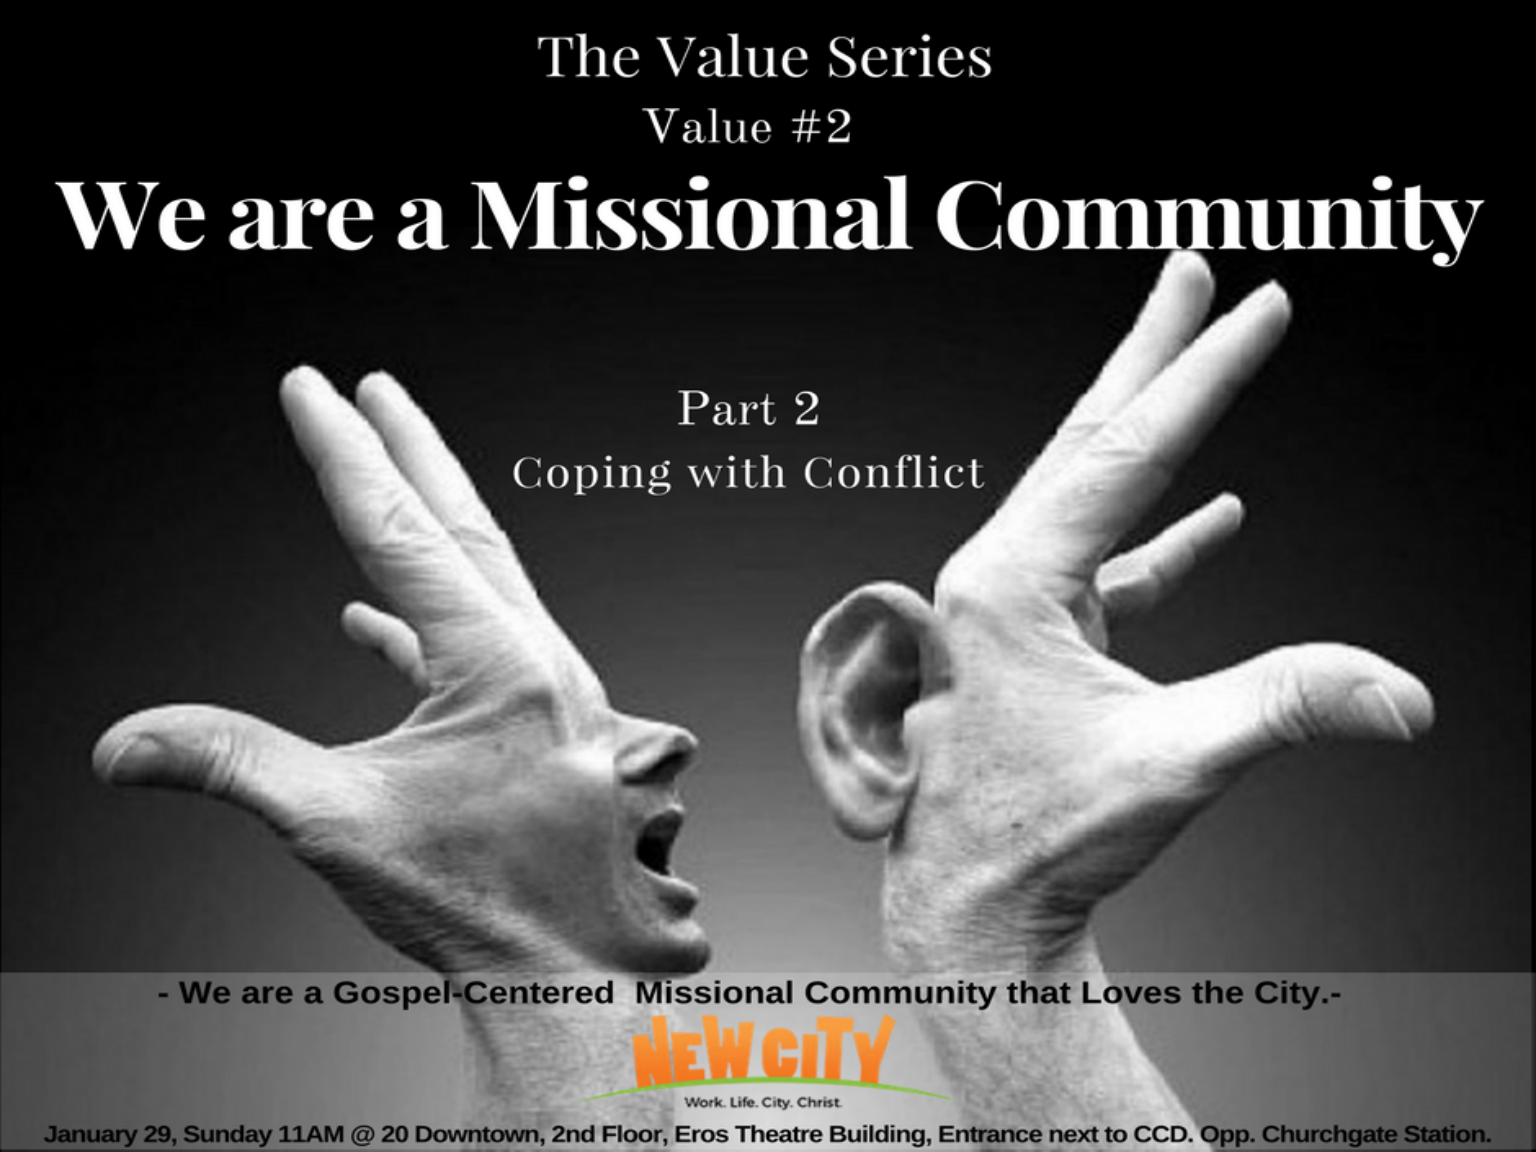 We are Missional Community (Part 2)